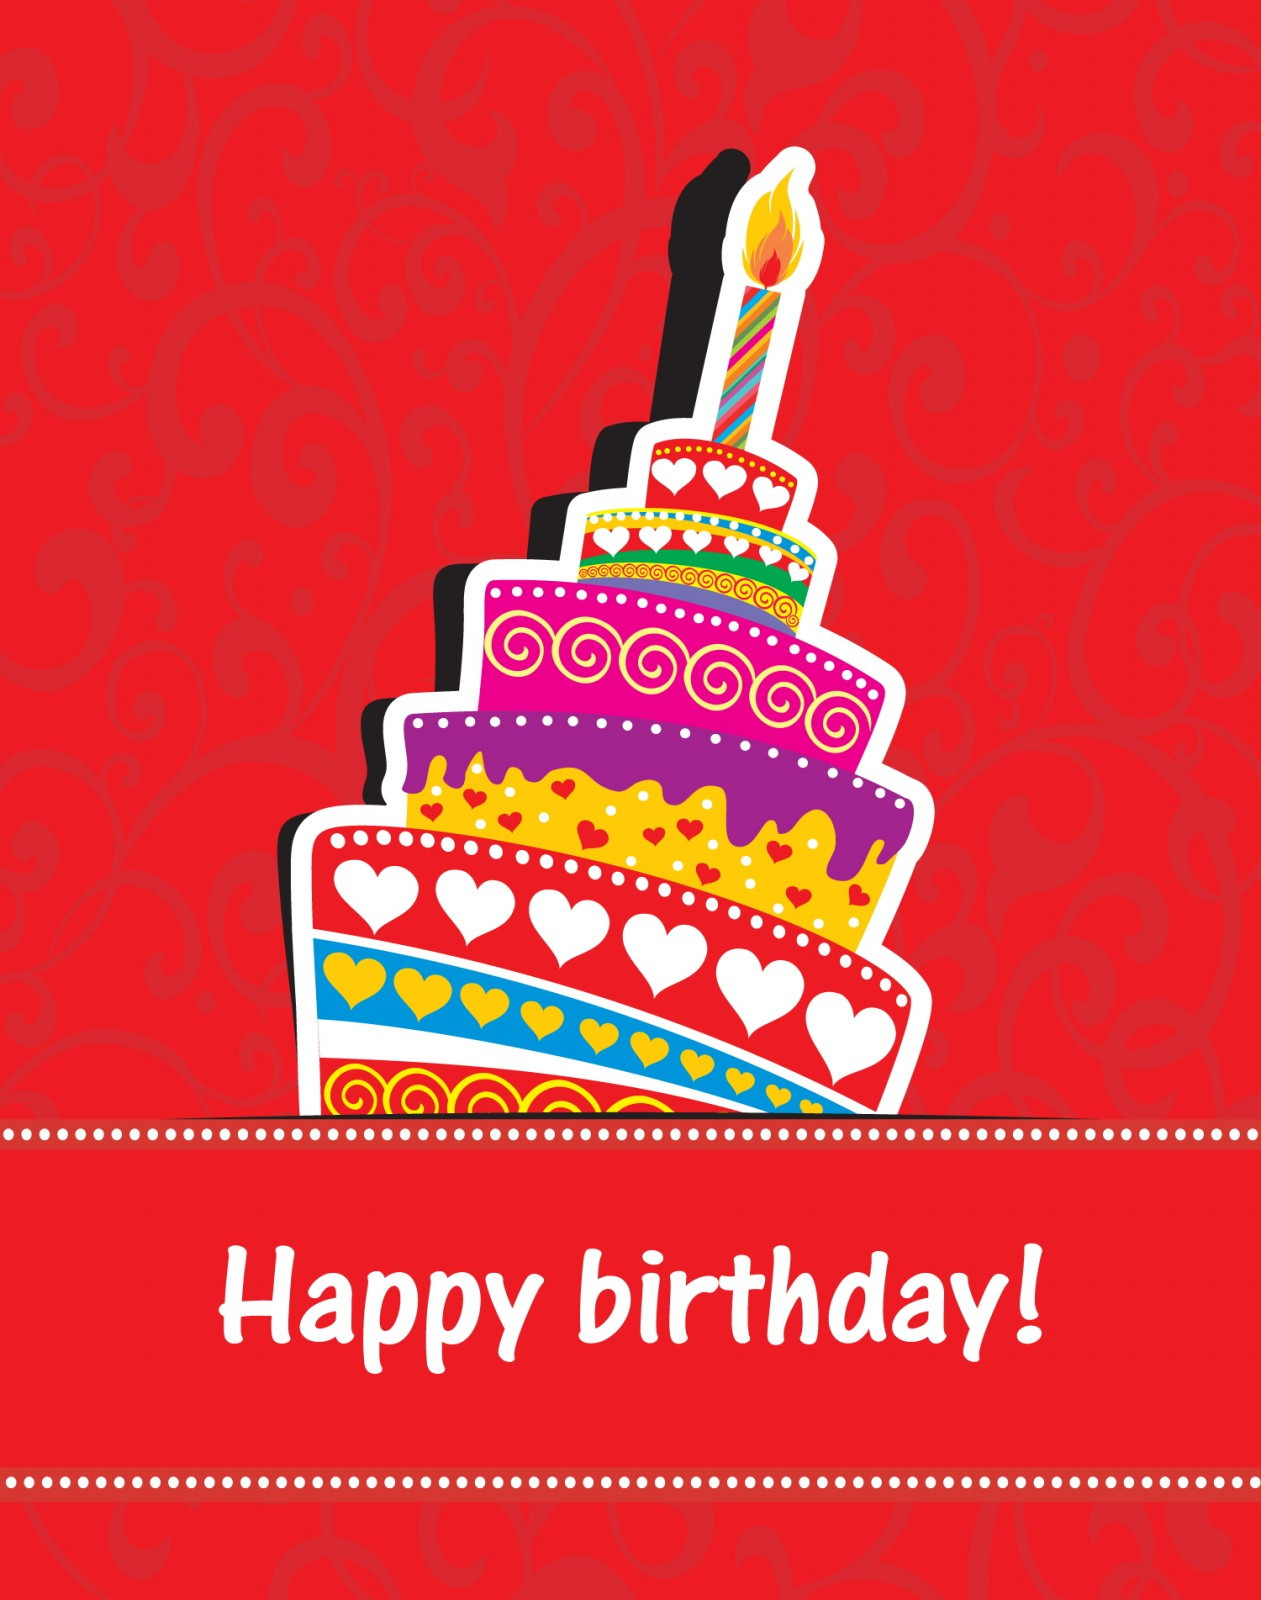 A Happy Birthday Card
 35 Happy Birthday Cards Free To Download – The WoW Style